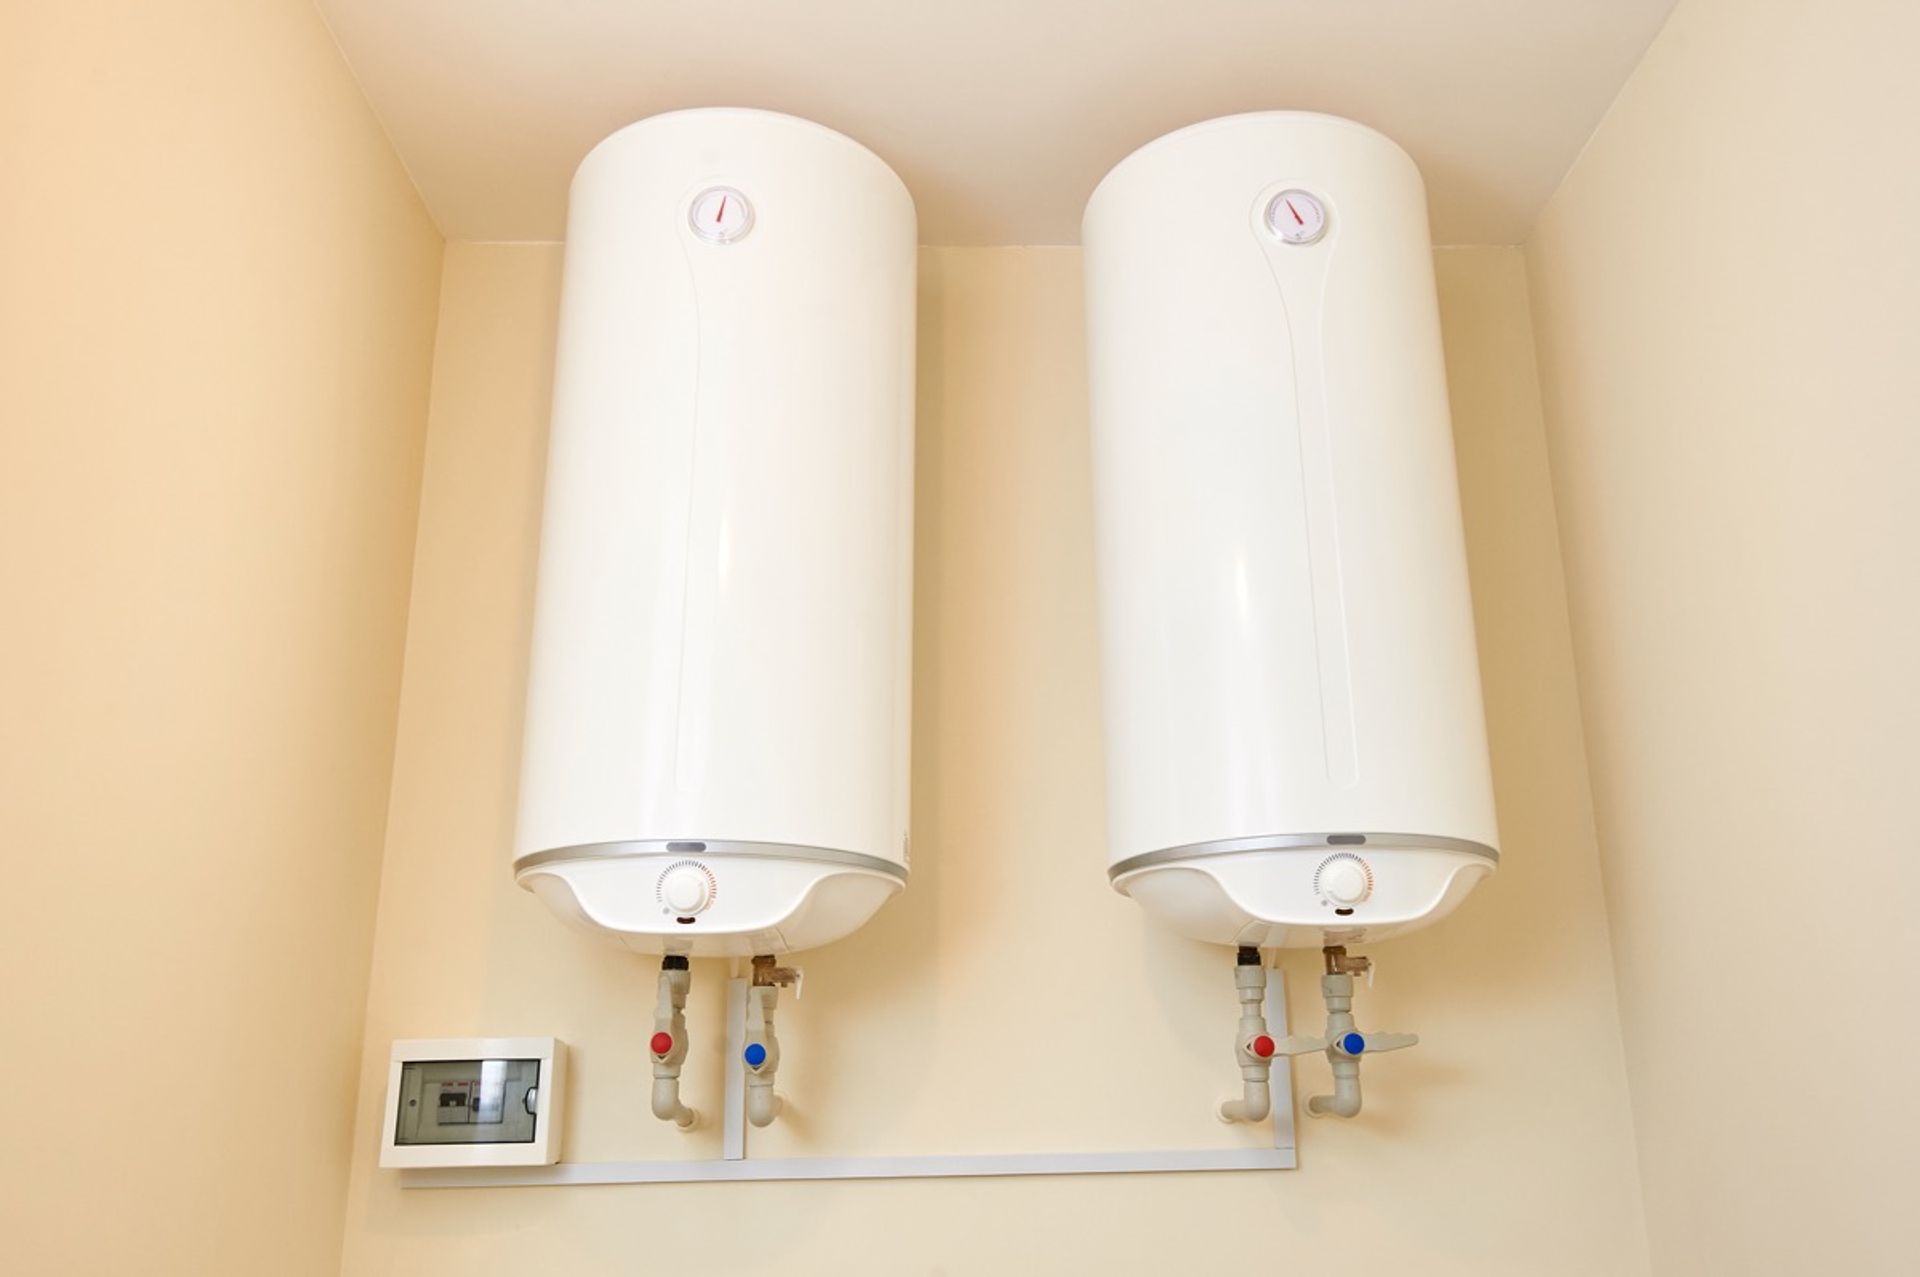 Two Electric Water Heaters On The Wall Home Wall 2023 11 27 05 24 58 Utc